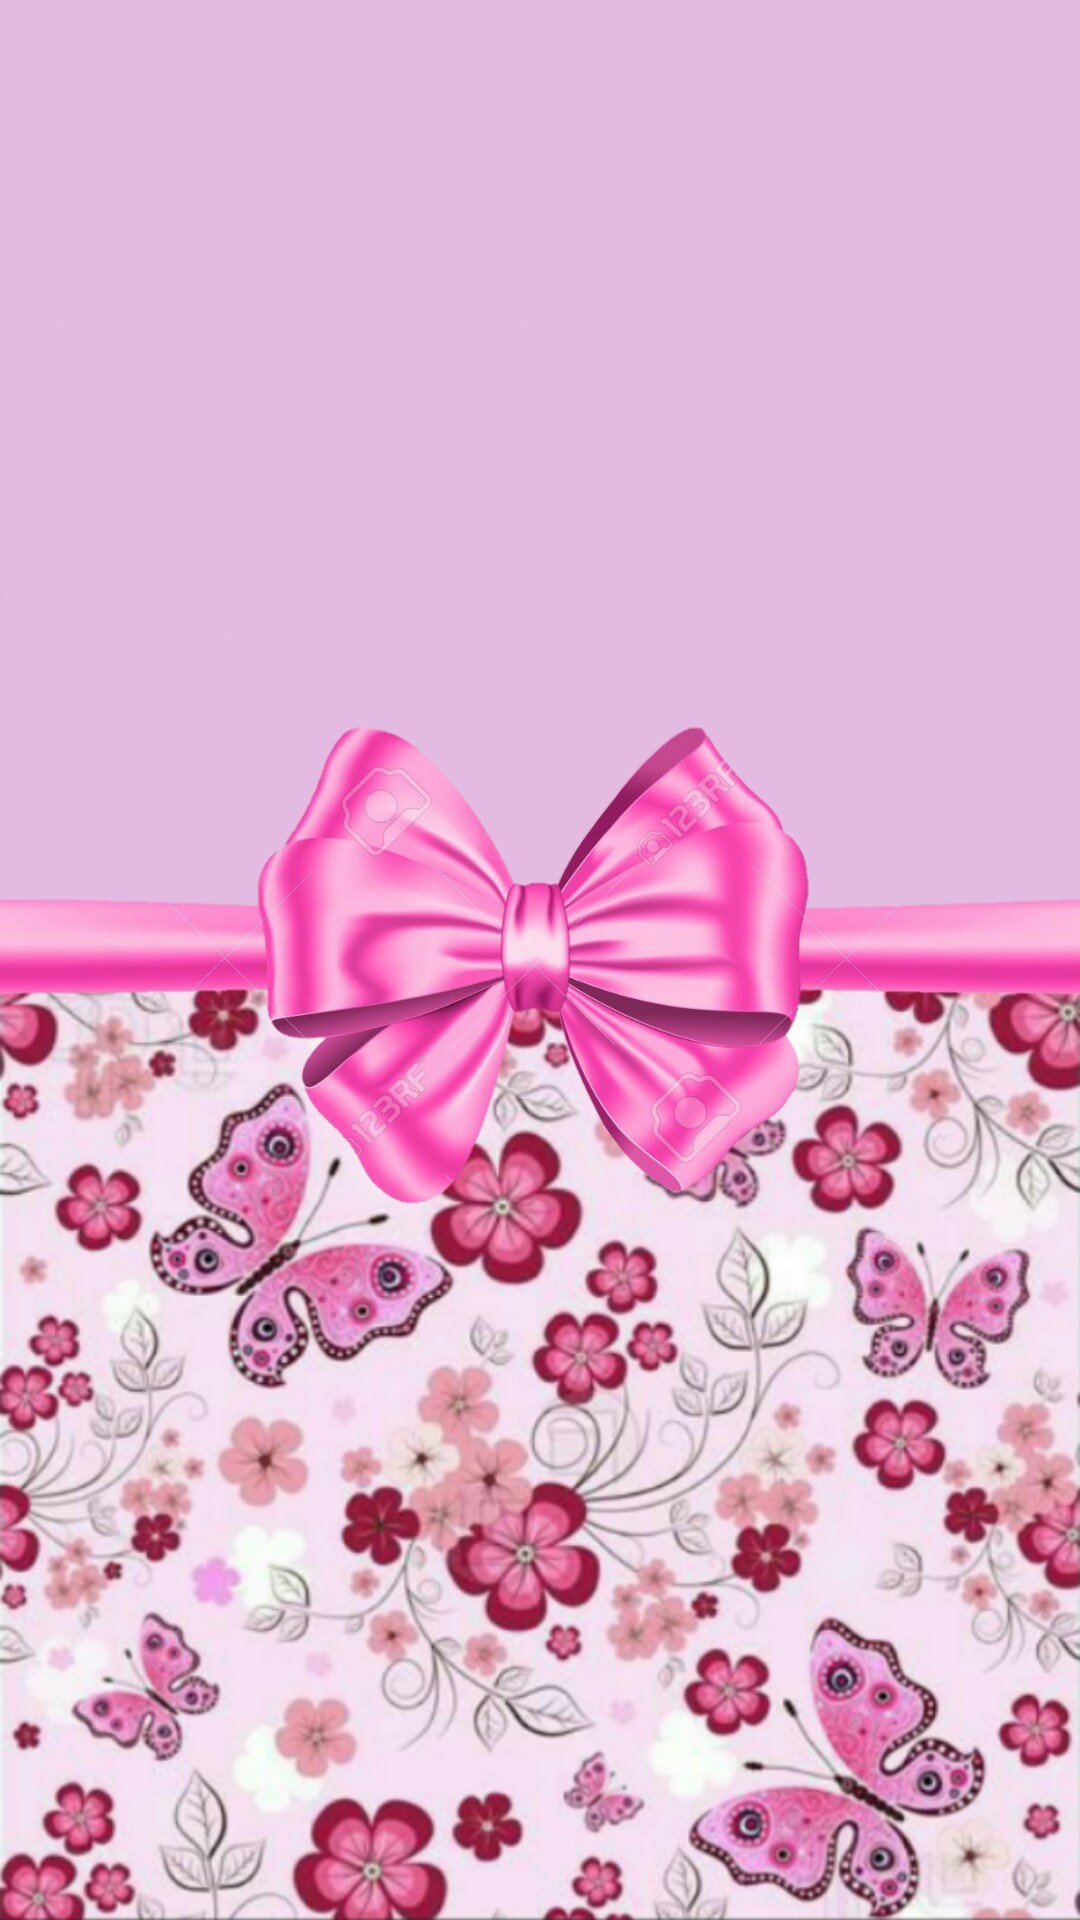 1080x1920 Purple and pink with flowers and bow